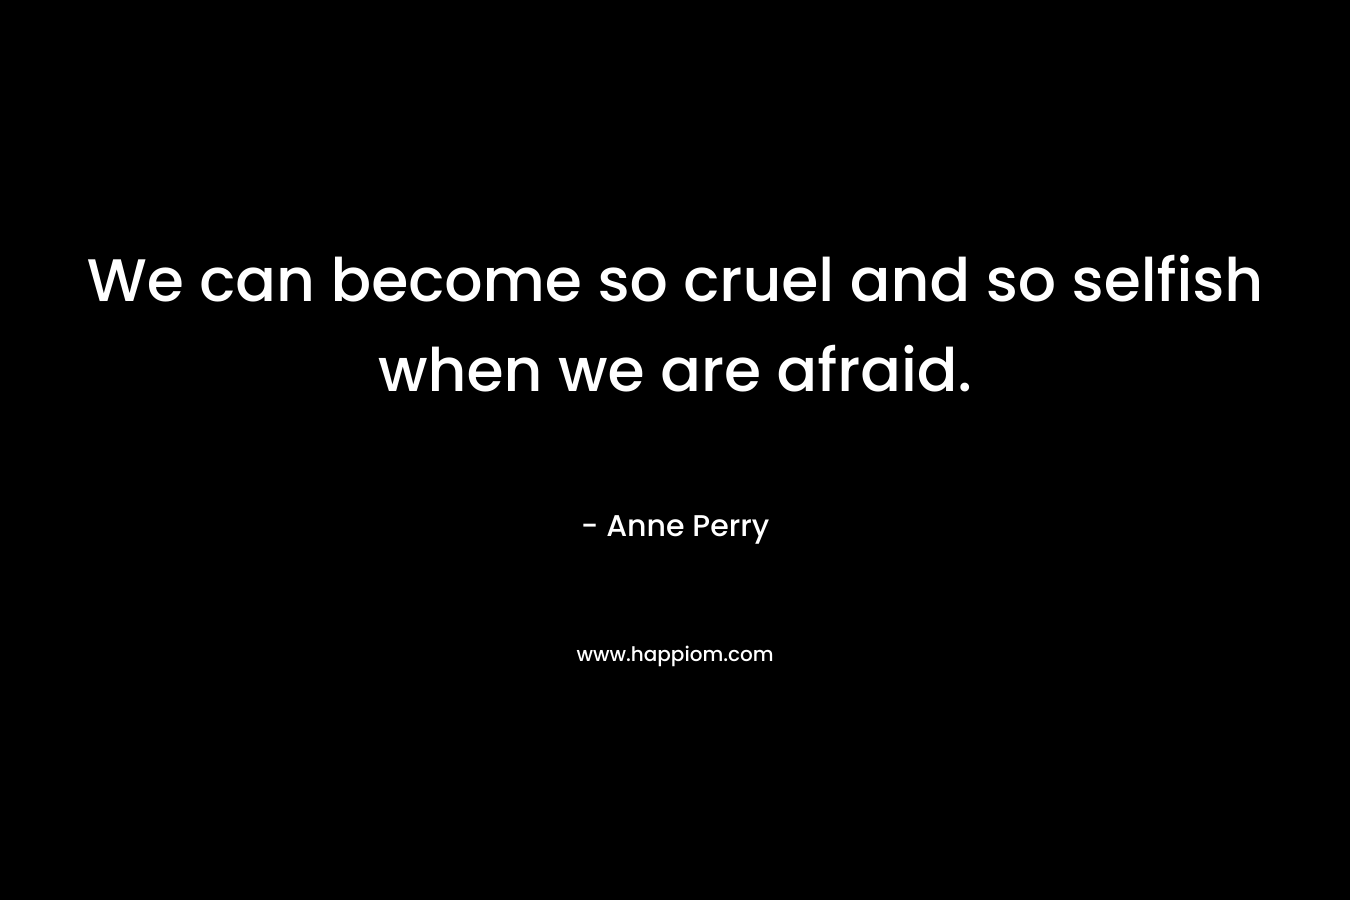 We can become so cruel and so selfish when we are afraid. – Anne Perry